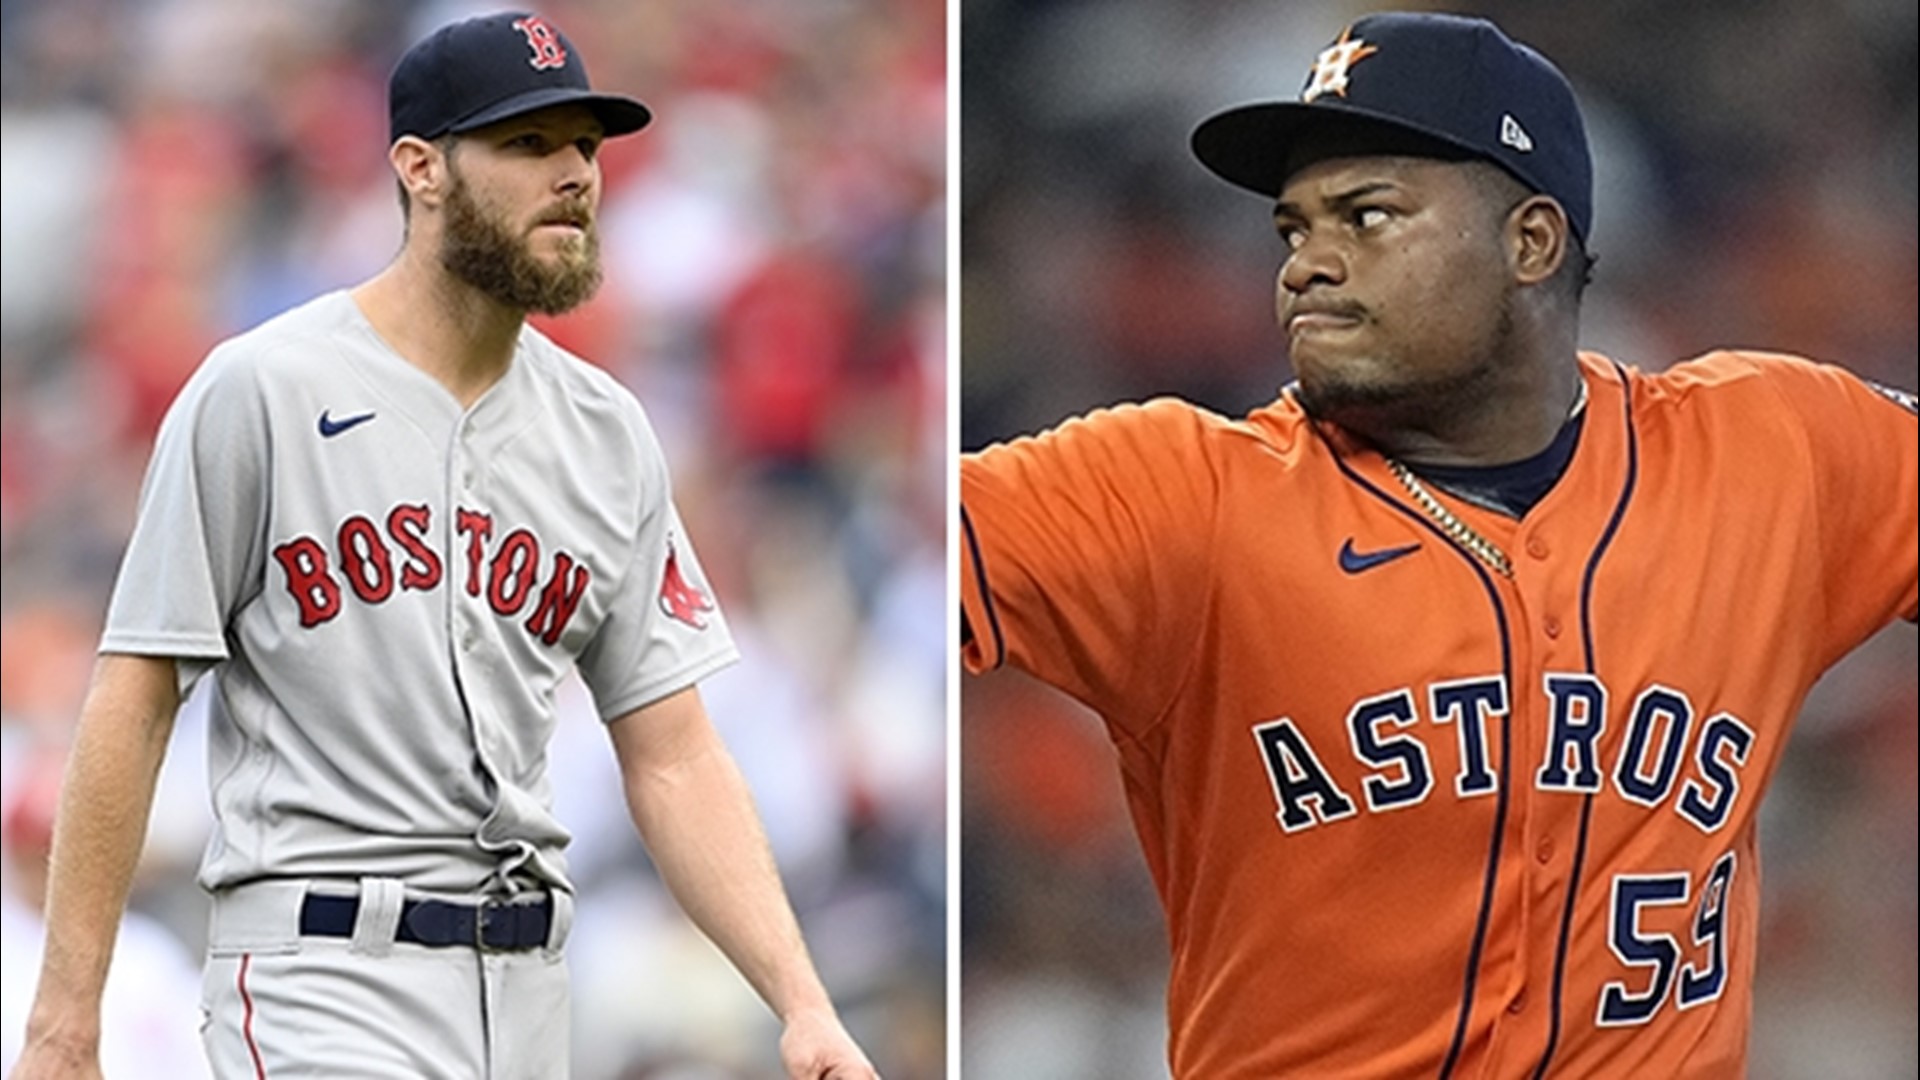 Jason Bristol & Jeremy Booth share their 3 keys to the Astros' game against the Red Sox. But without Lance McCullers Jr. out, Matt Musil says it'll be a tough win.